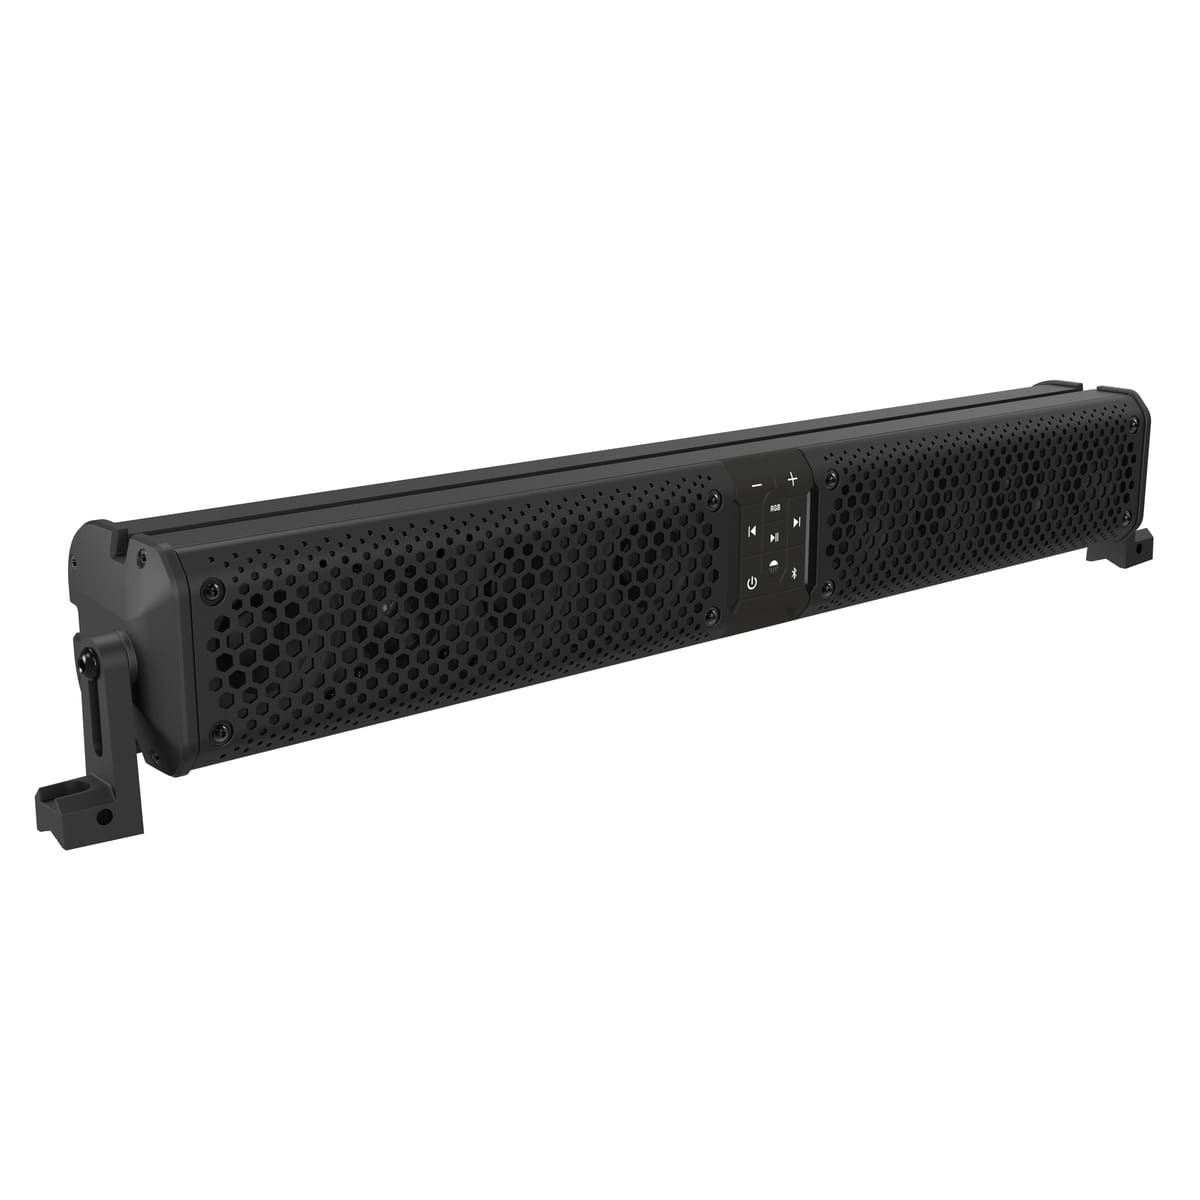 Wet Sounds All-In-One Amplified Bluetooth Sound Bar With Remote